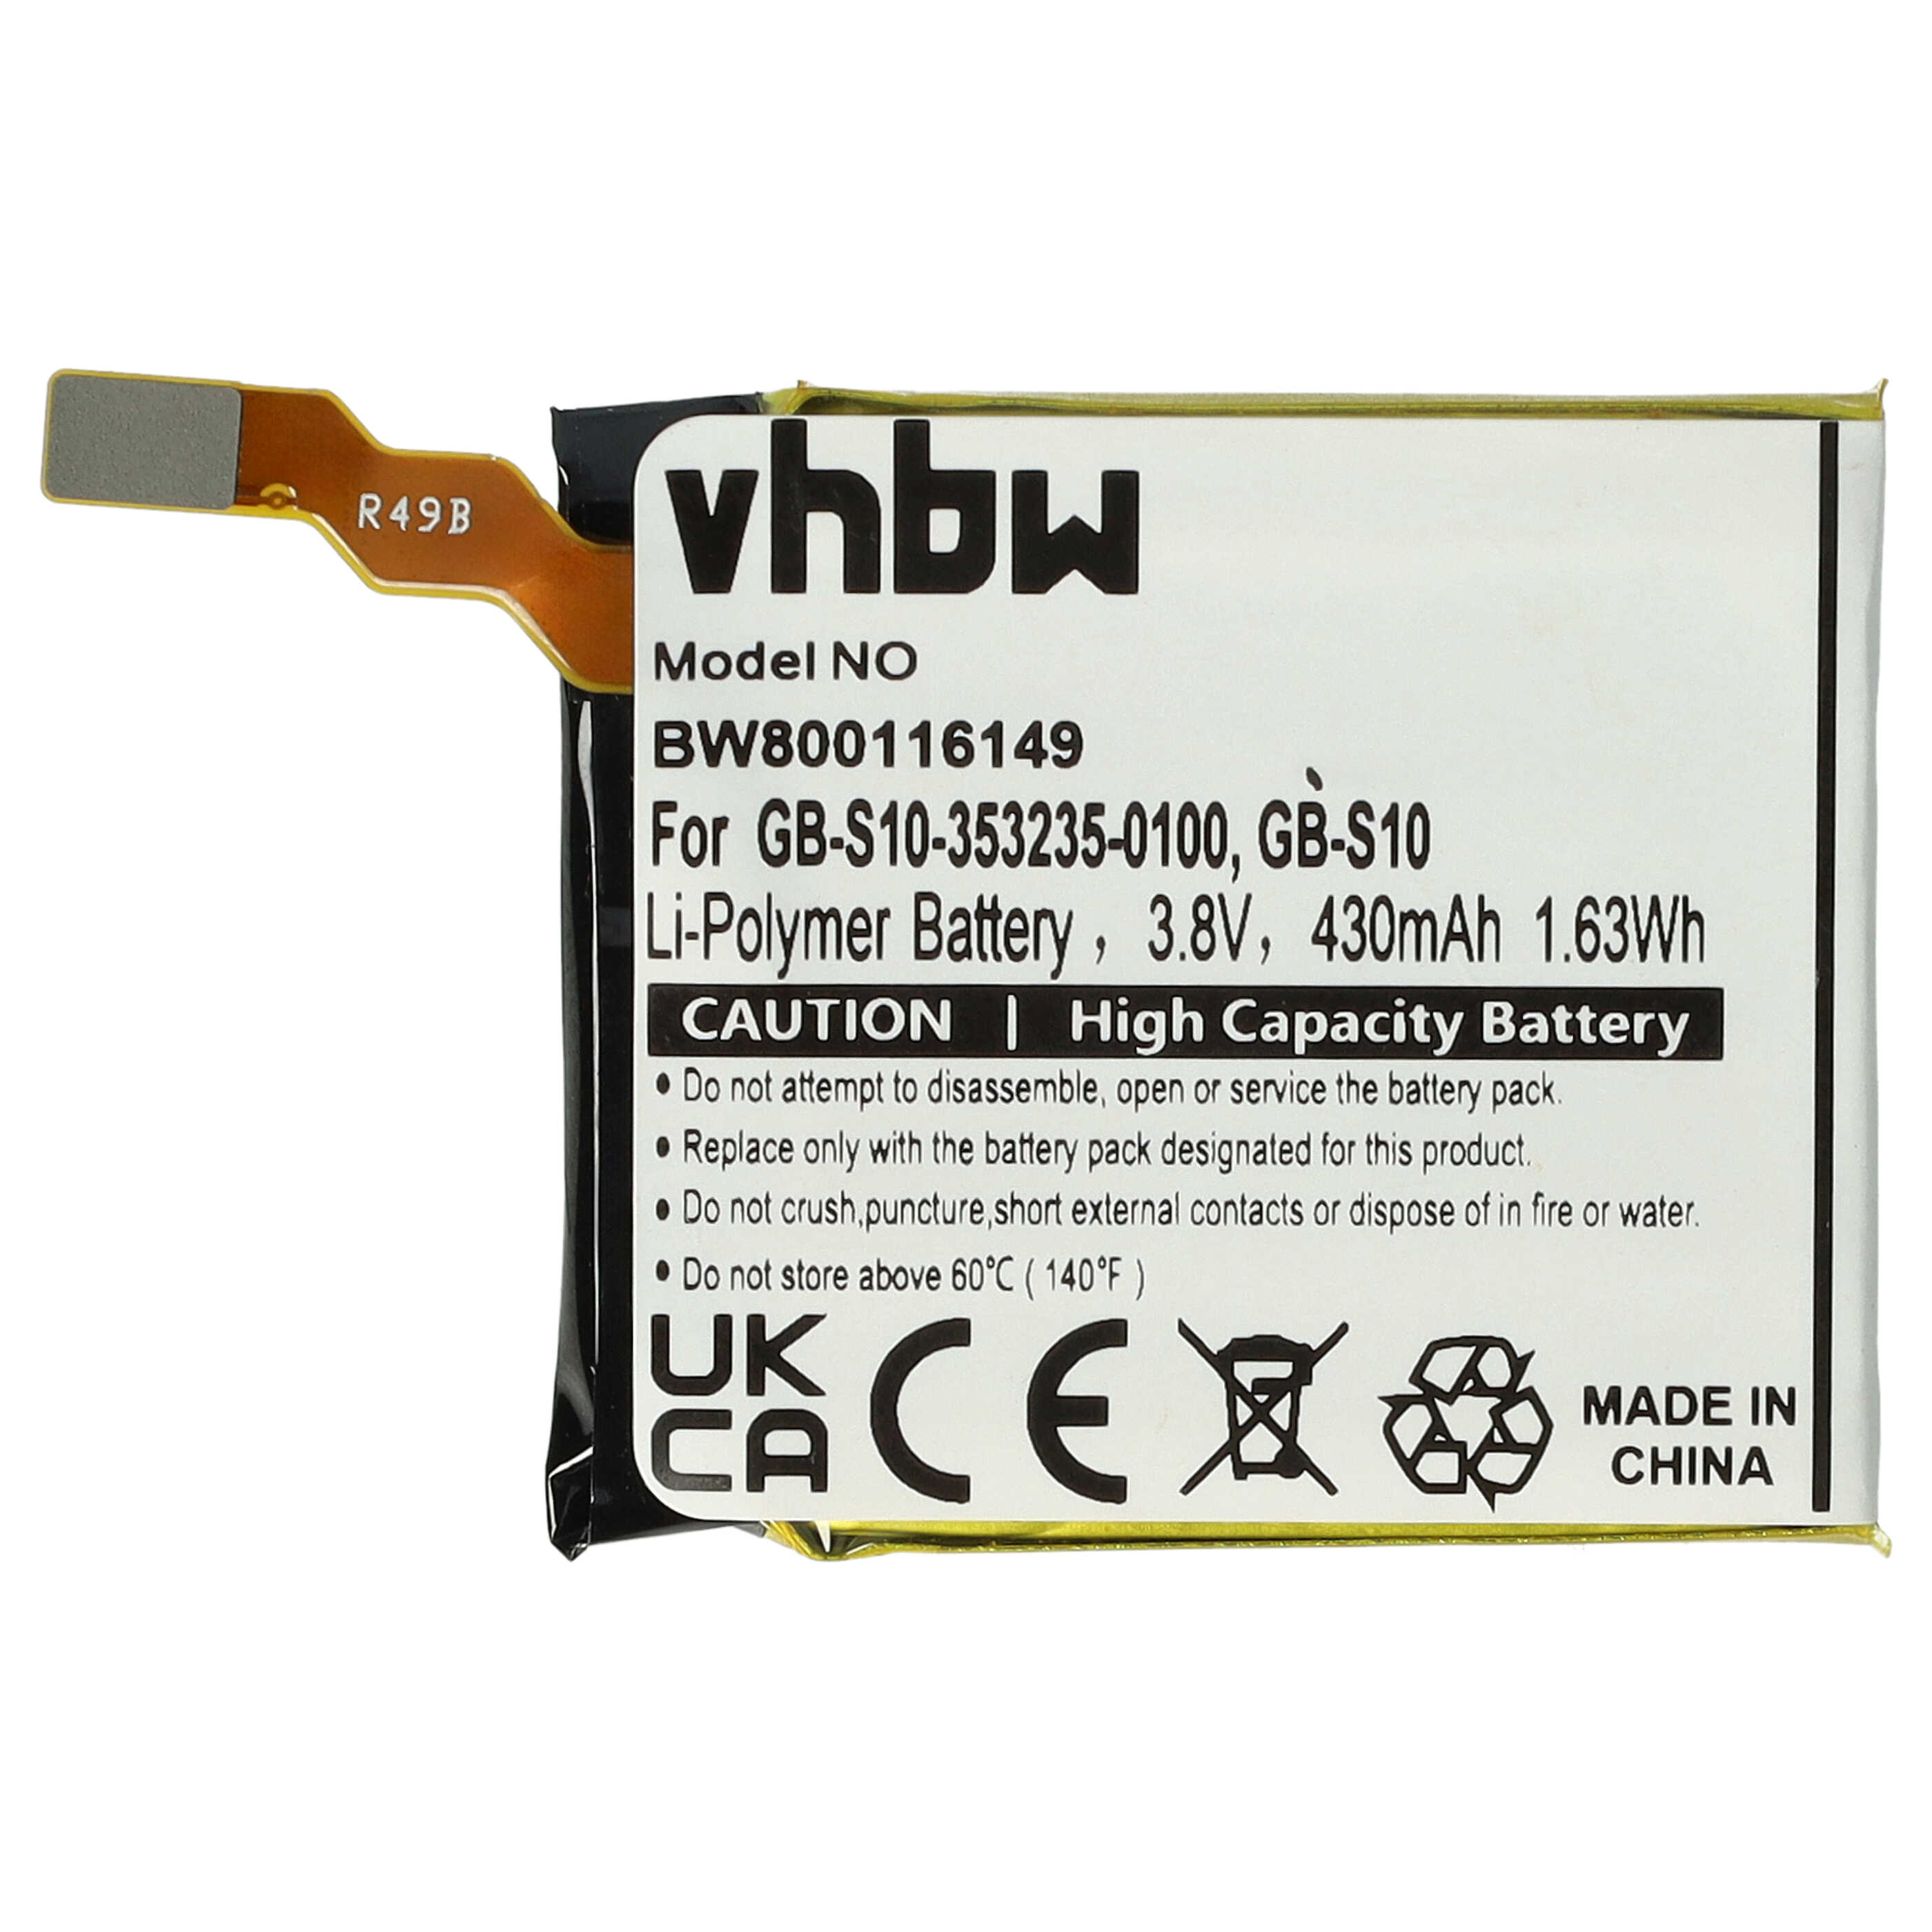 Smartwatch Battery Replacement for Sony 1288-9079, GB-S10, 1588-0911 - 430mAh 3.7V Li-polymer